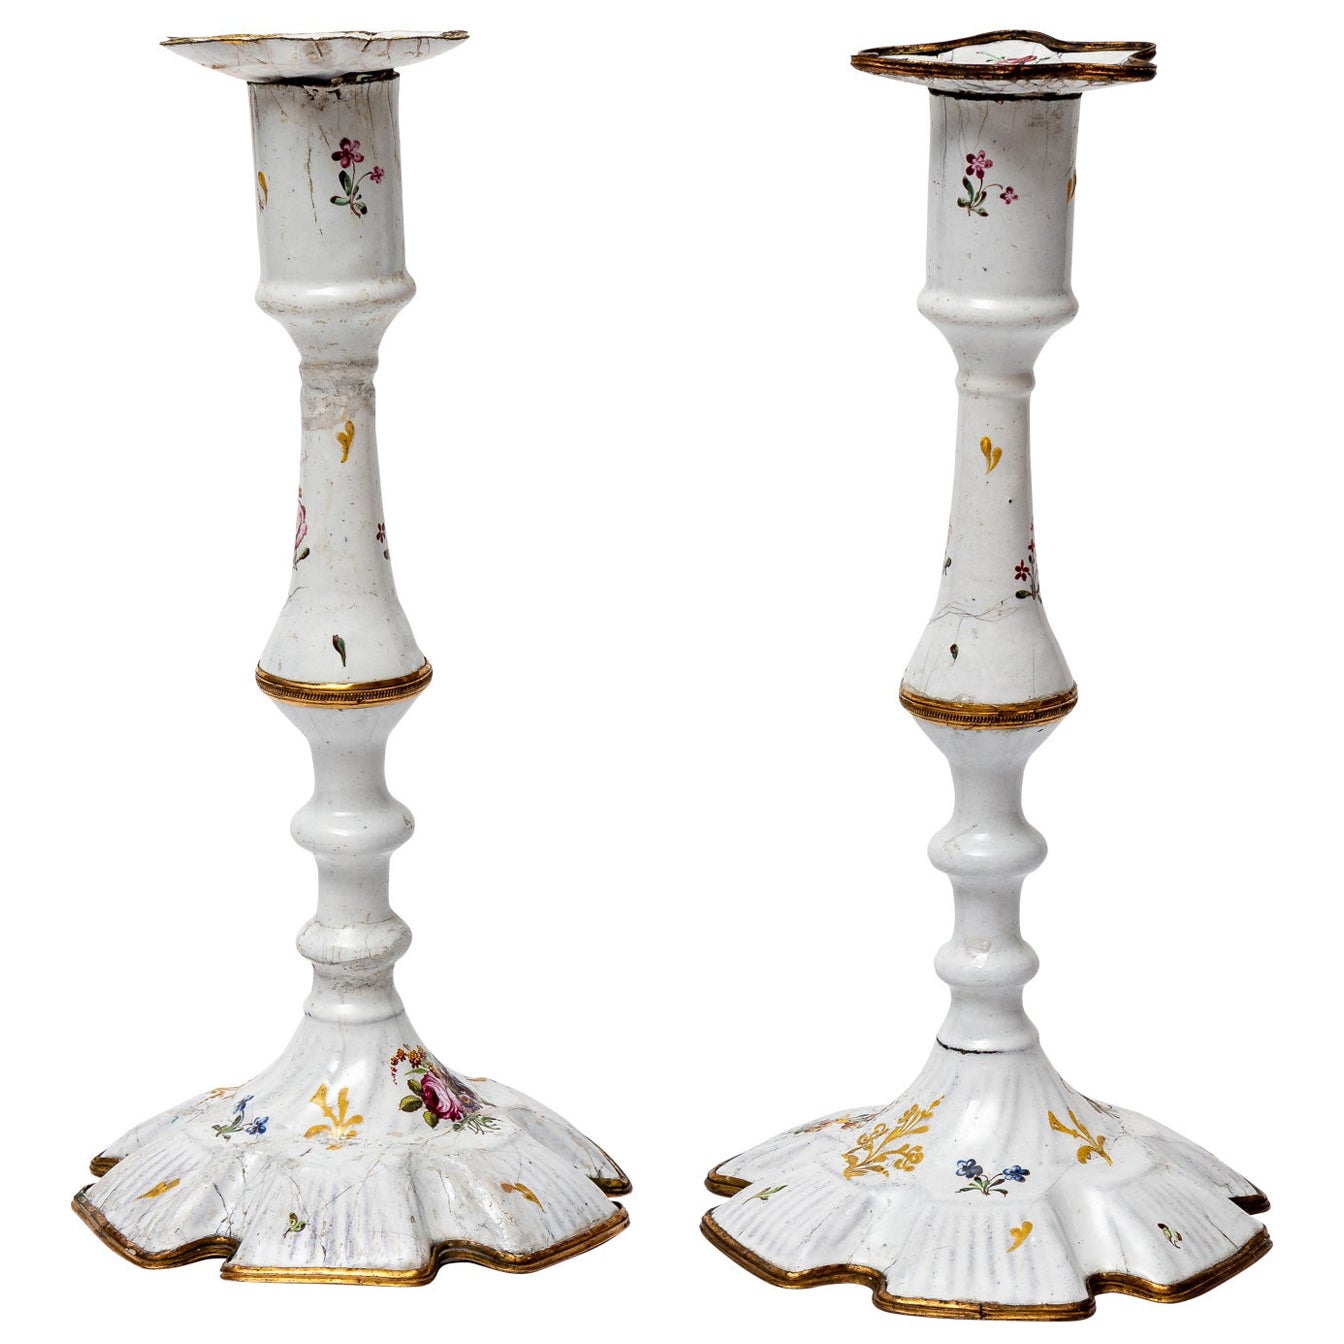 Pair of Rare Battersea Candlesticks For Sale